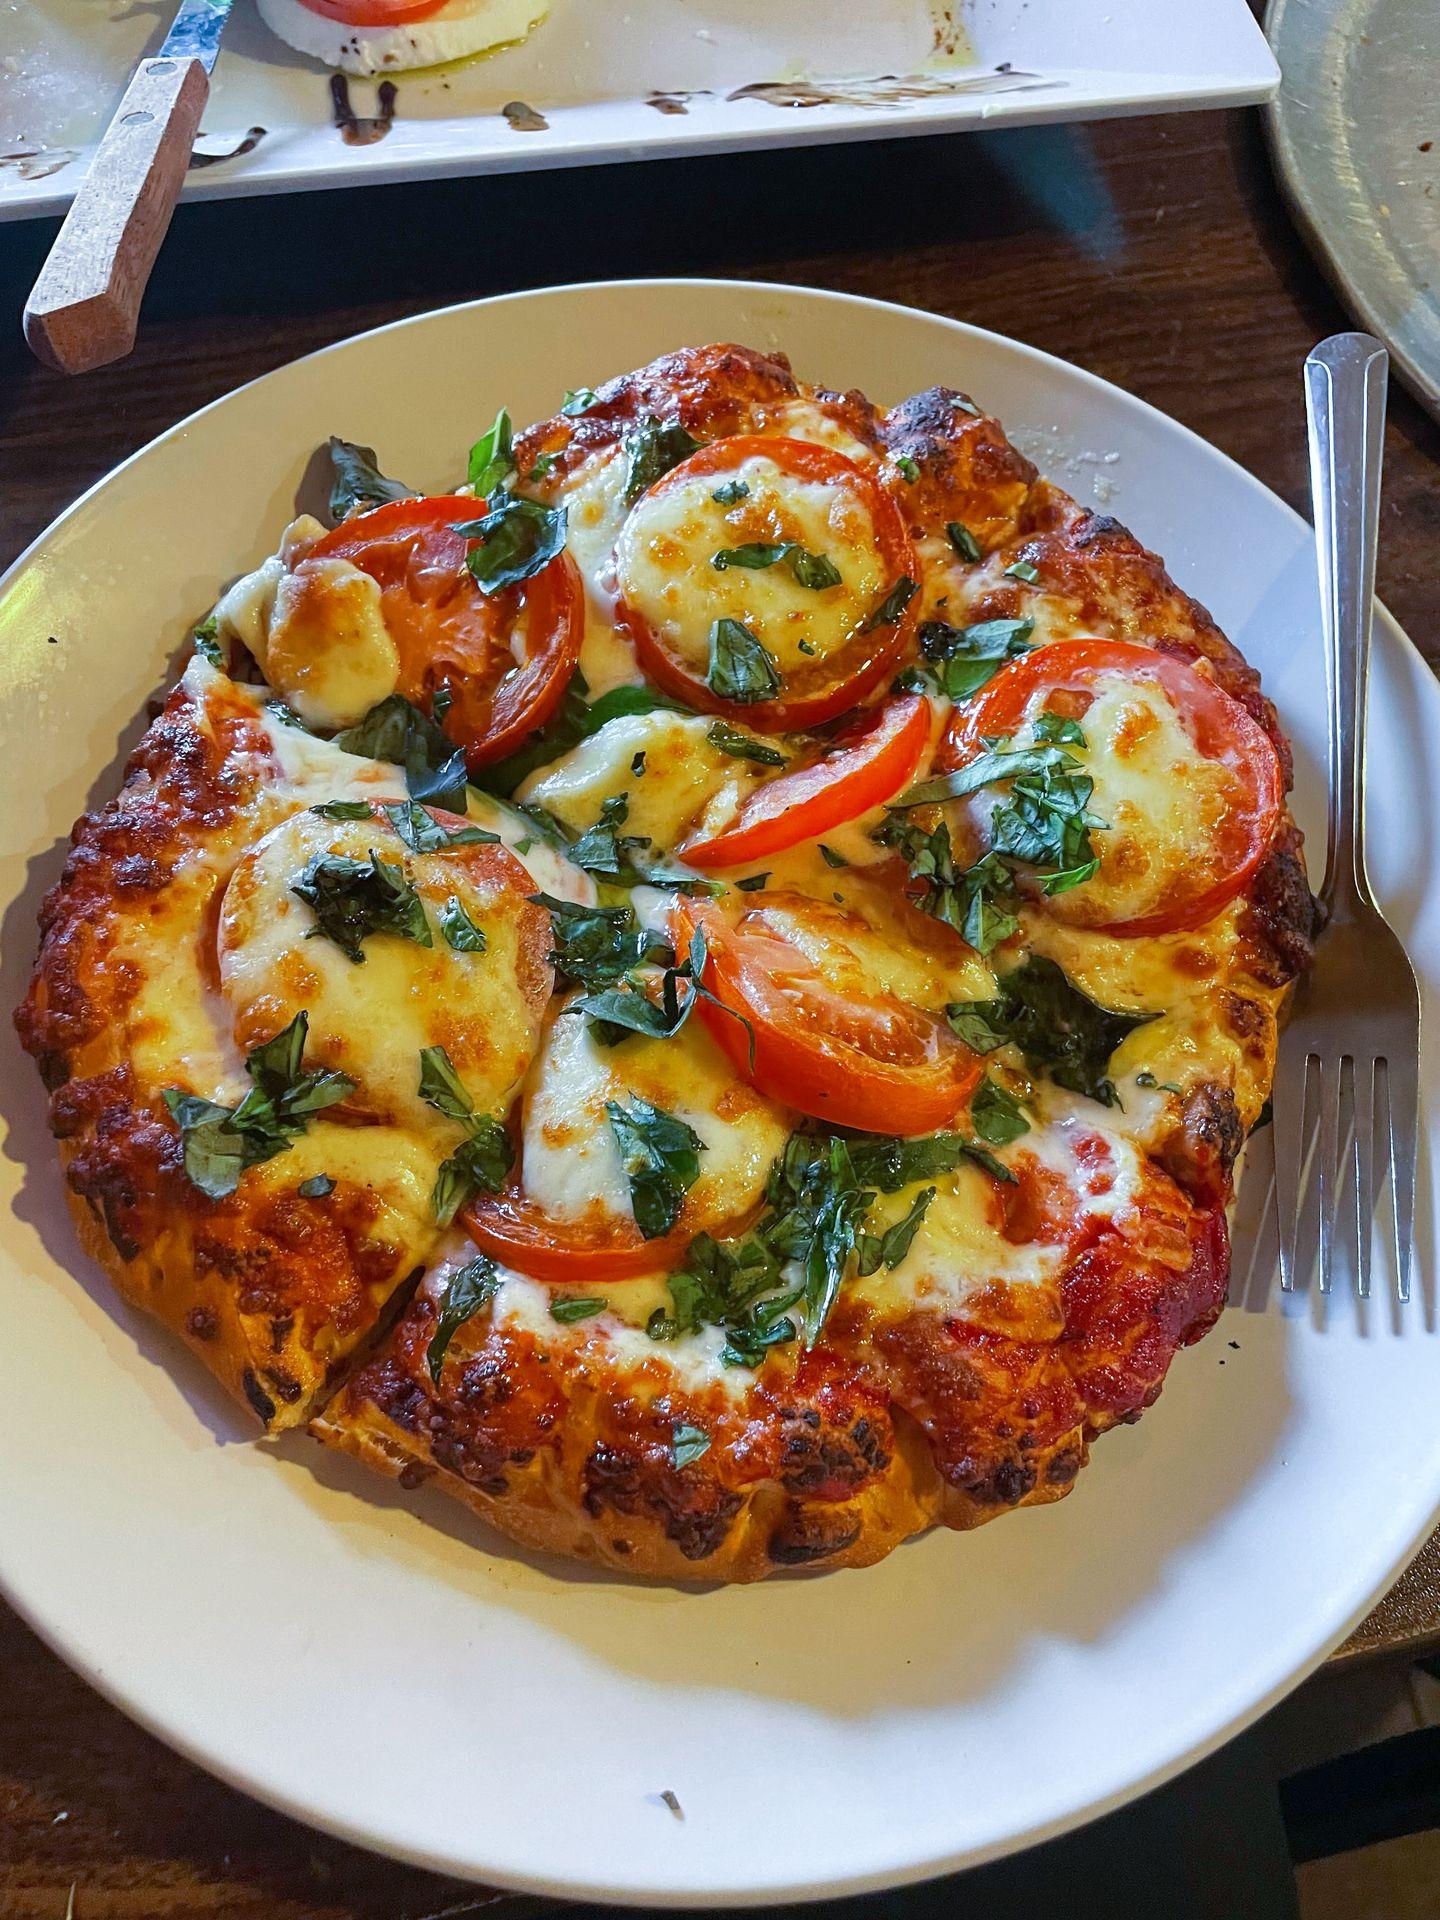 A small pizza topped with cheese, tomatoes and basil.